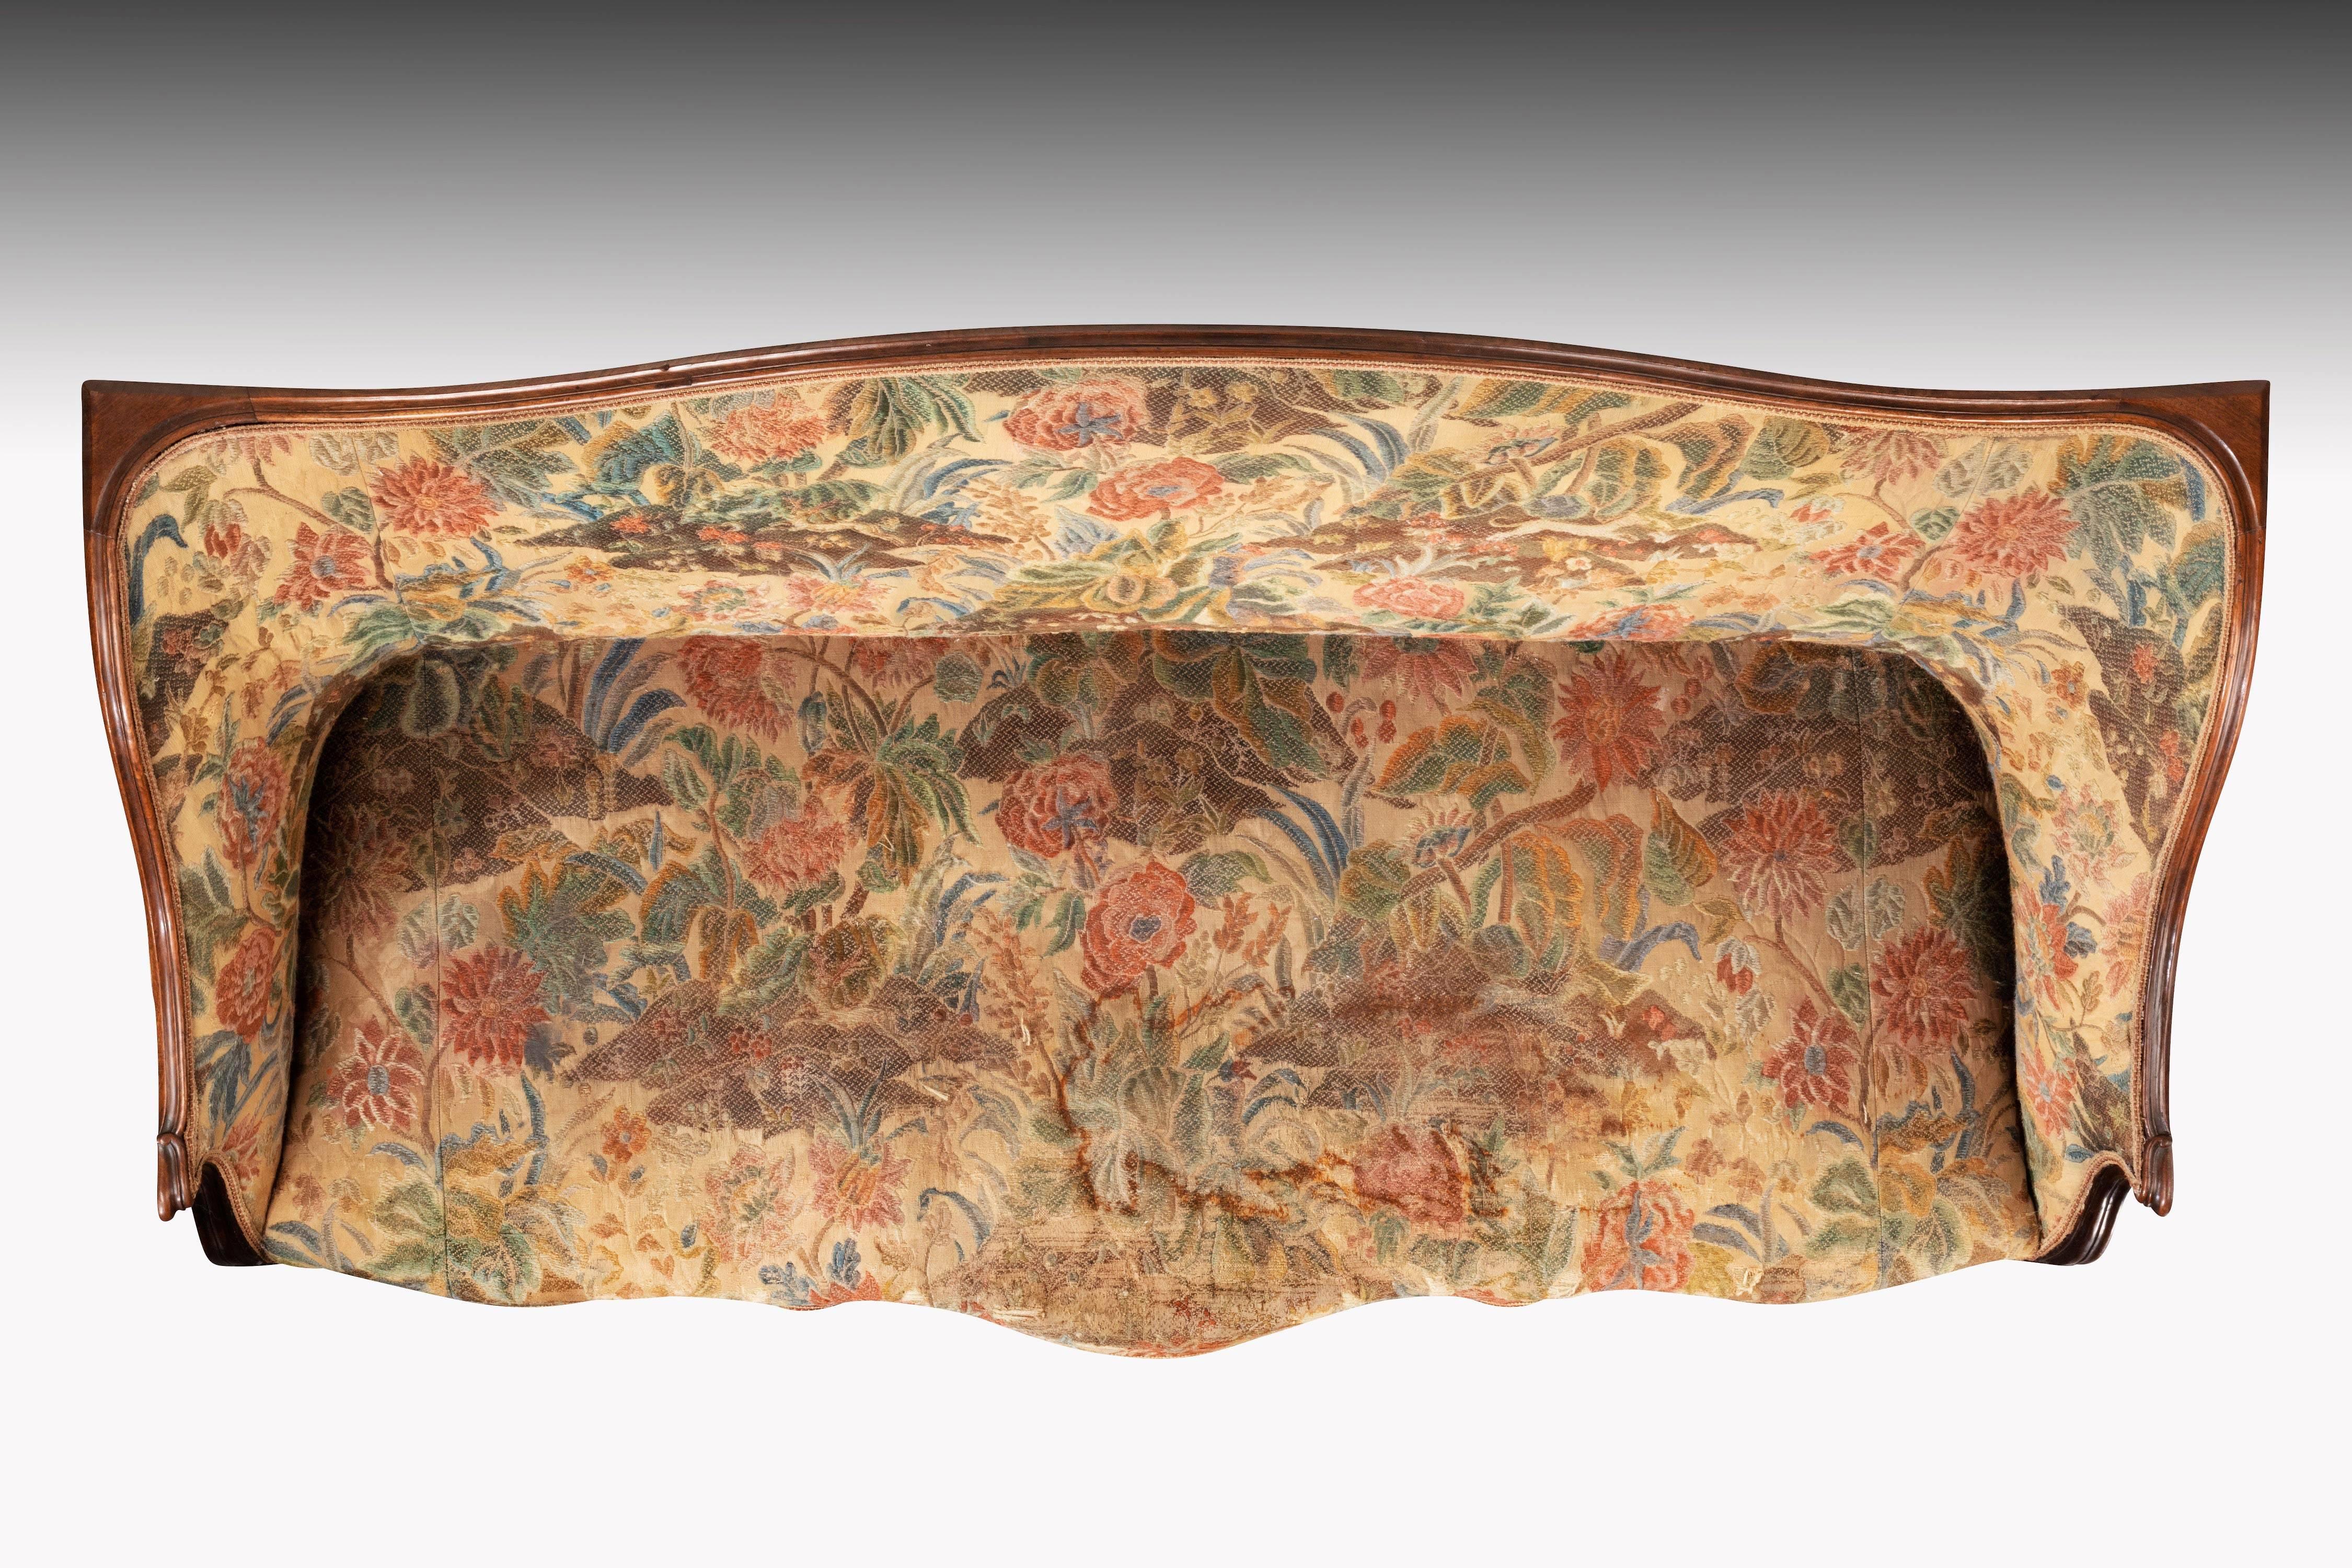 An elegant and most unusual mahogany framed George III period sofa. Overall convoluted shape with a triple serpentine front on French type supports. Retaining period tapestry, now somewhat worn at the front of the seat. This could possibly be